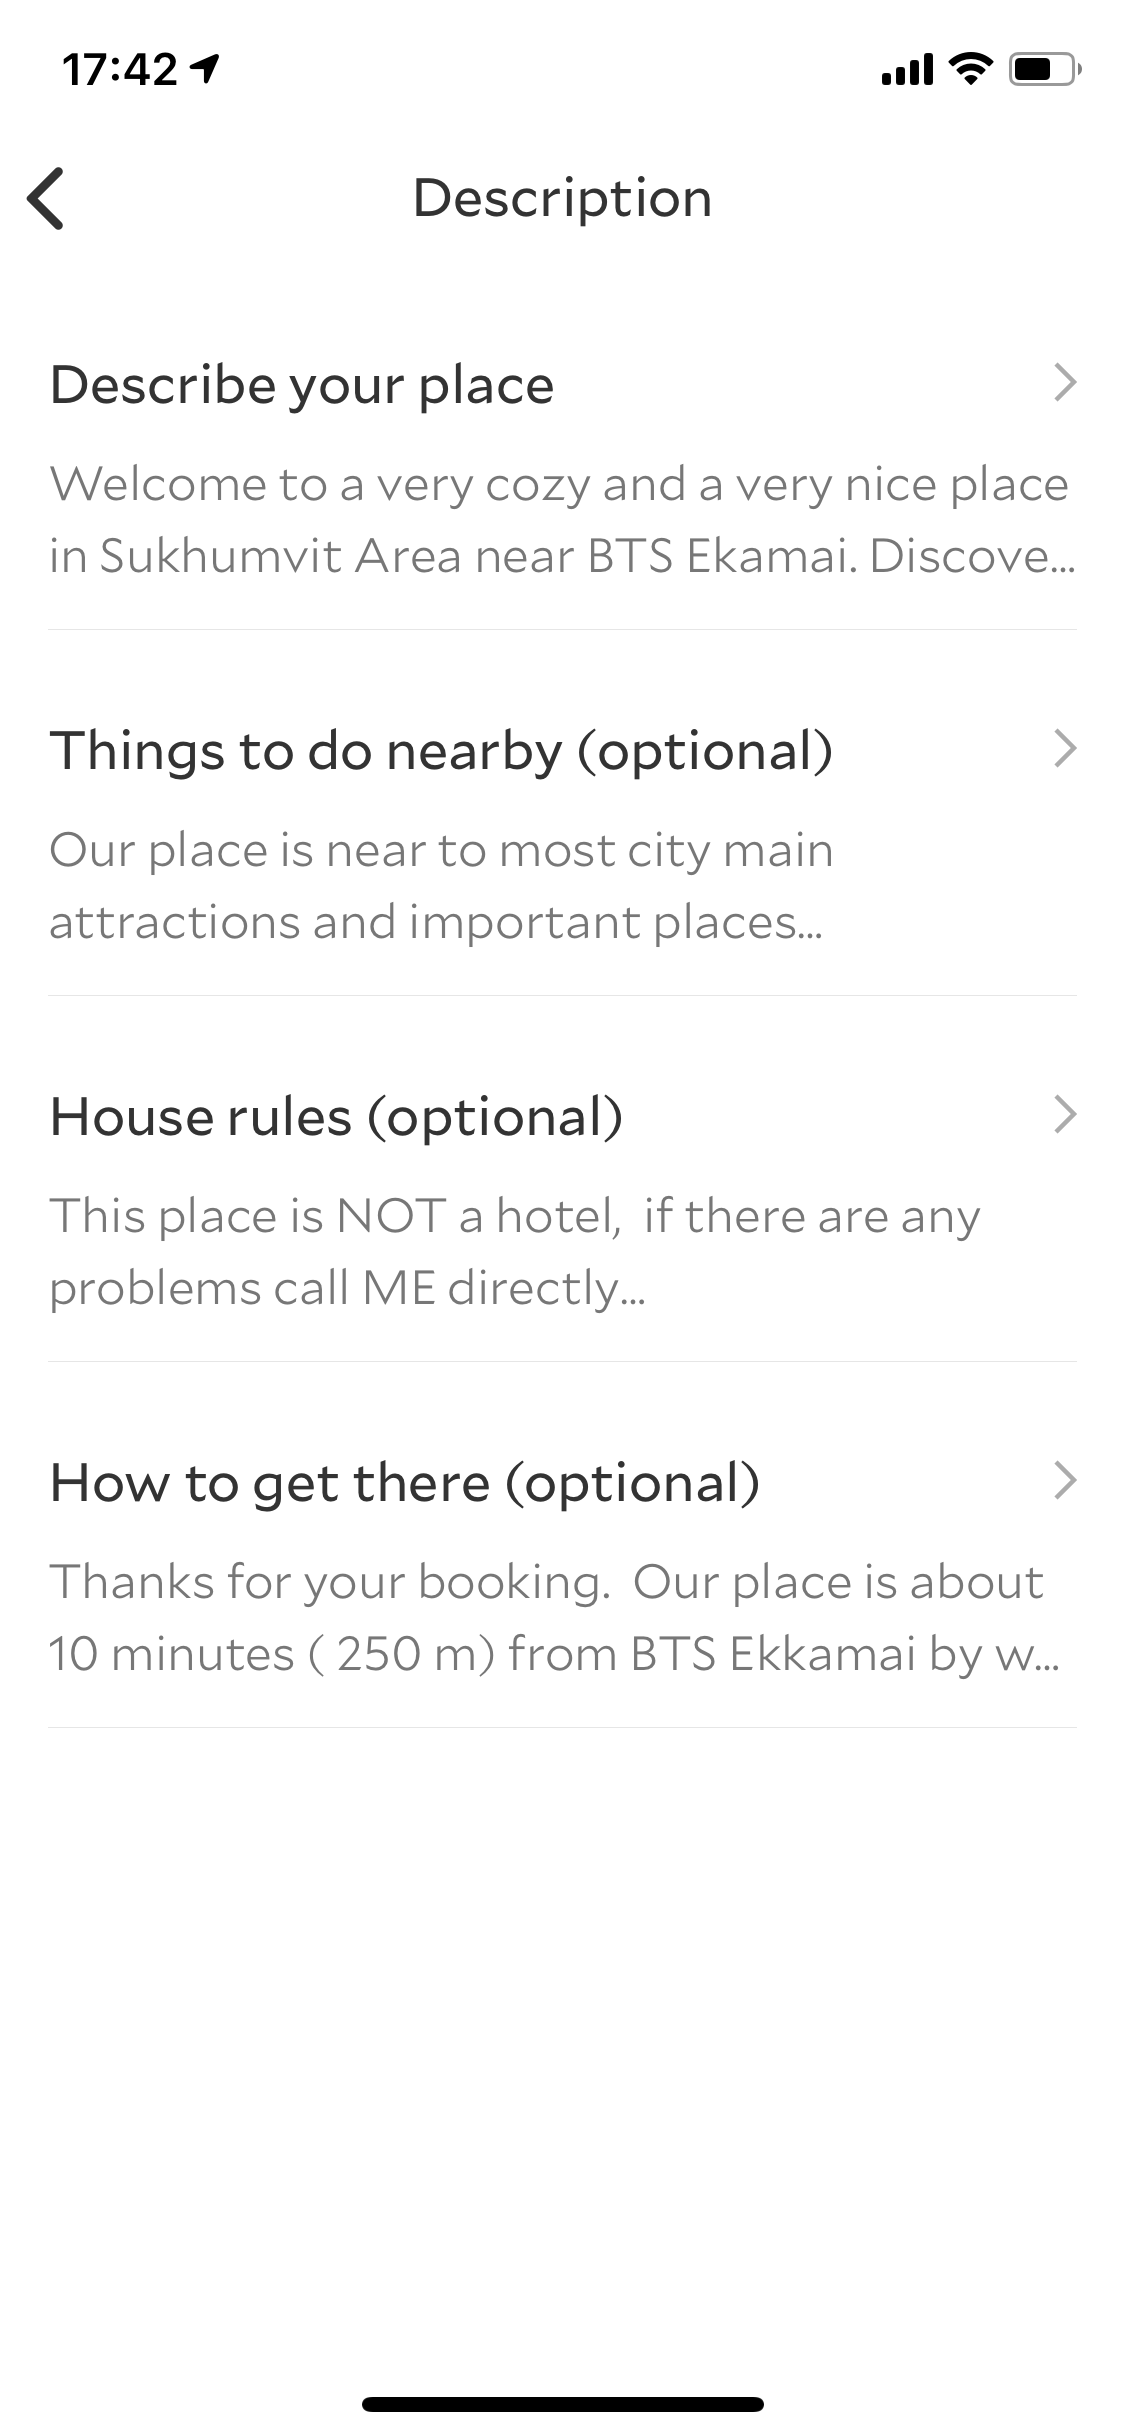 12.Add_House_rules__How_to_get_to_the_property_and_Check-in_instructions_5.PNG